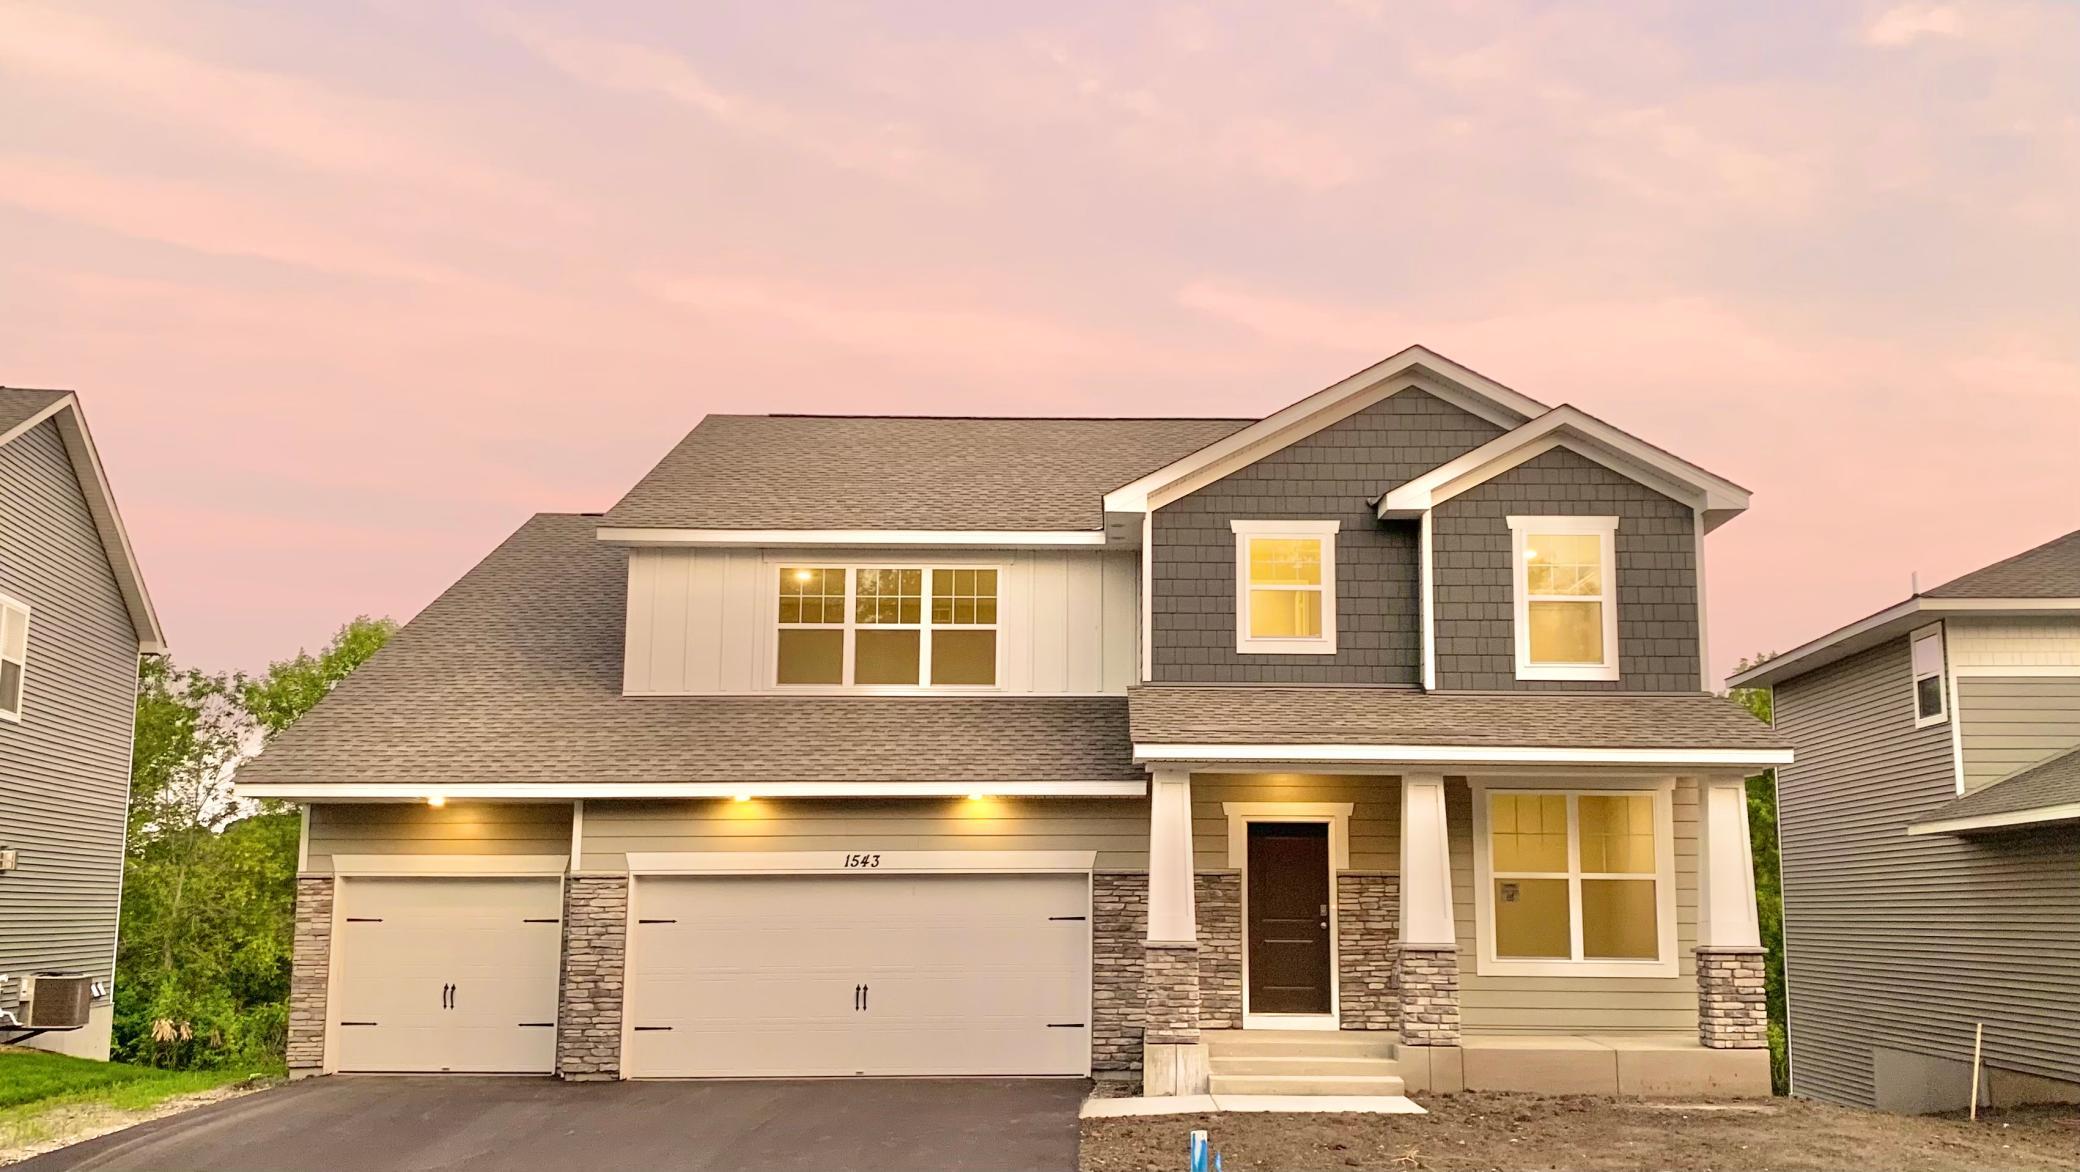 This brand new home is ready for YOU to call home sweet home! Charming front porch and soaring roof lines. Sod, irrigation and landscape included. Views of mature trees/conservation area. Walking trails, community park and more!